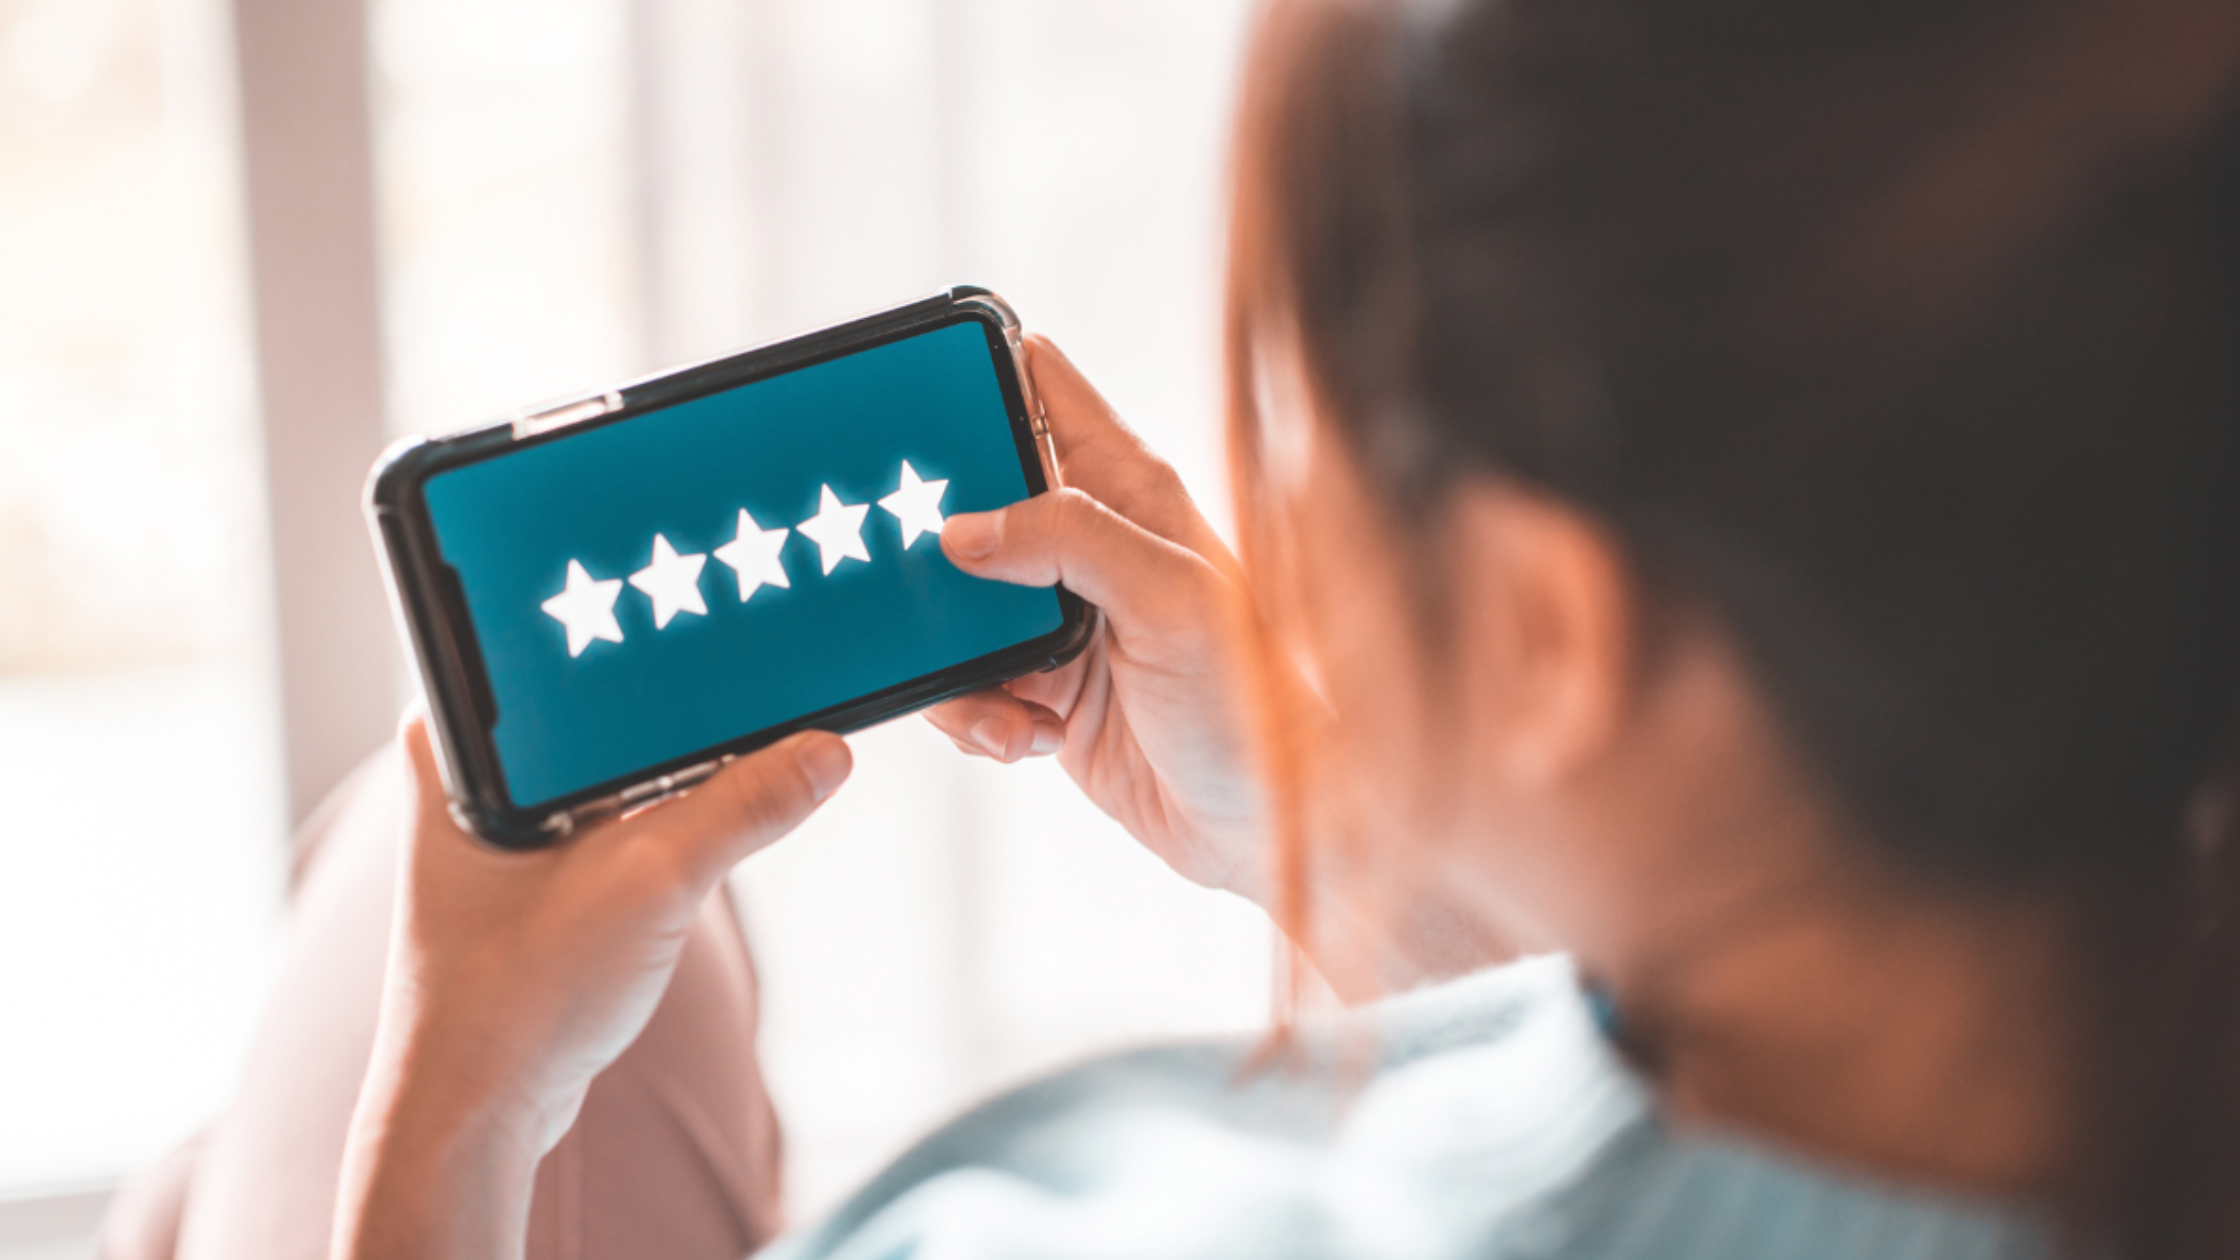 Woman Leaving 5 star review on her mobile phone